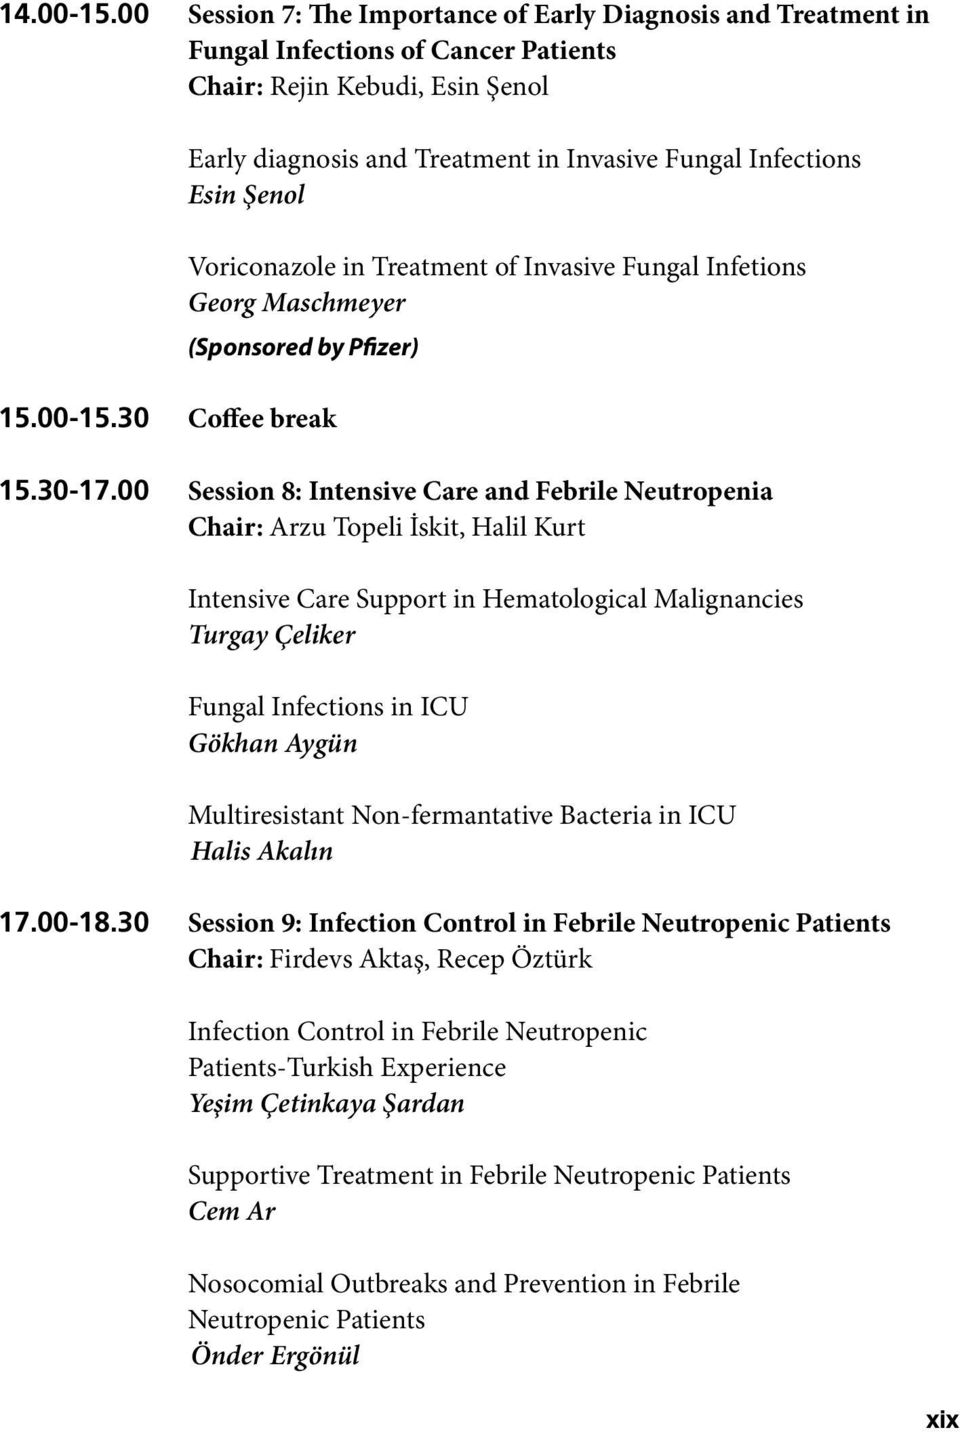 00 Session 8: Intensive Care and Febrile Neutropenia Chair: Arzu Topeli İskit, Halil Kurt Intensive Care Support in Hematological Malignancies Turgay Çeliker Fungal Infections in ICU Gökhan Aygün